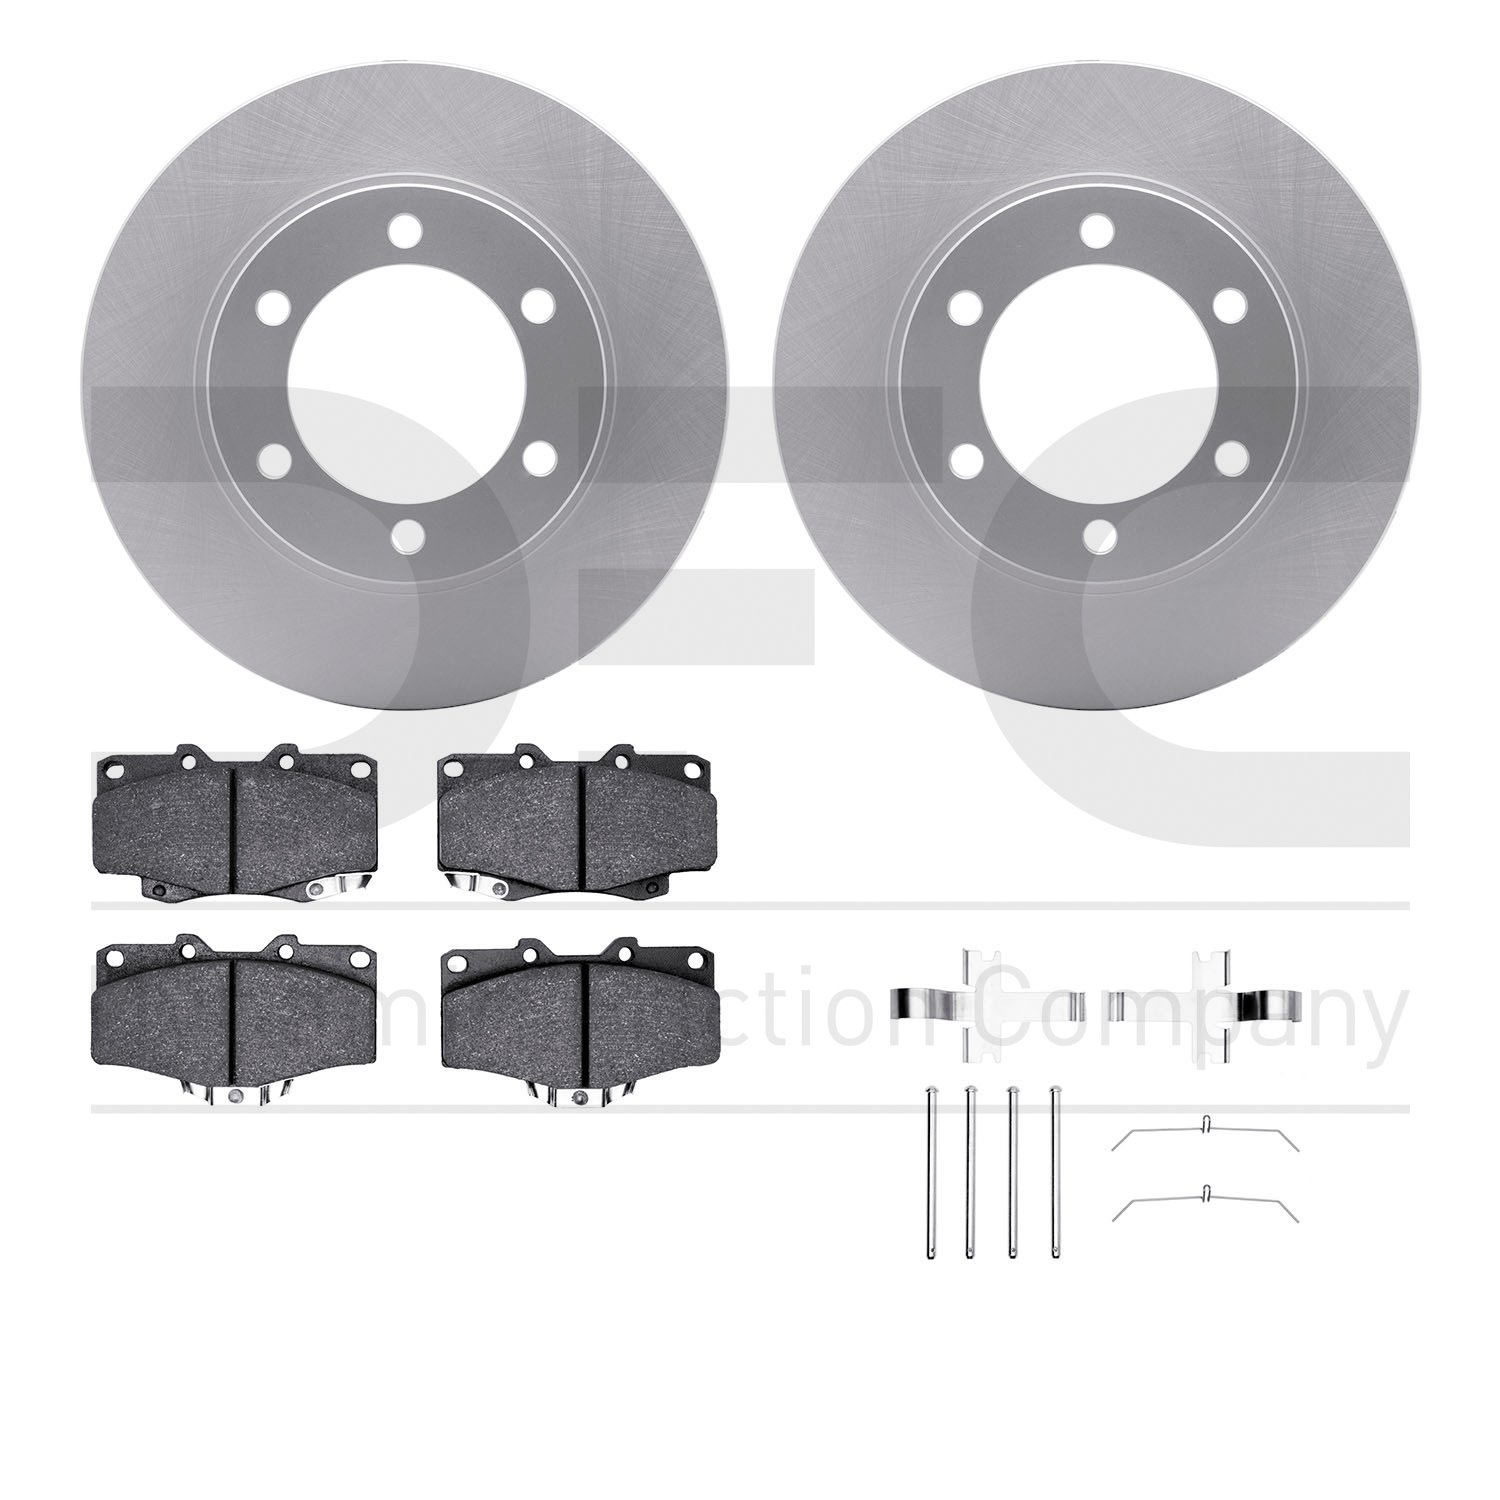 4412-76006 Geospec Brake Rotors with Ultimate-Duty Brake Pads & Hardware, 1995-2004 Lexus/Toyota/Scion, Position: Front